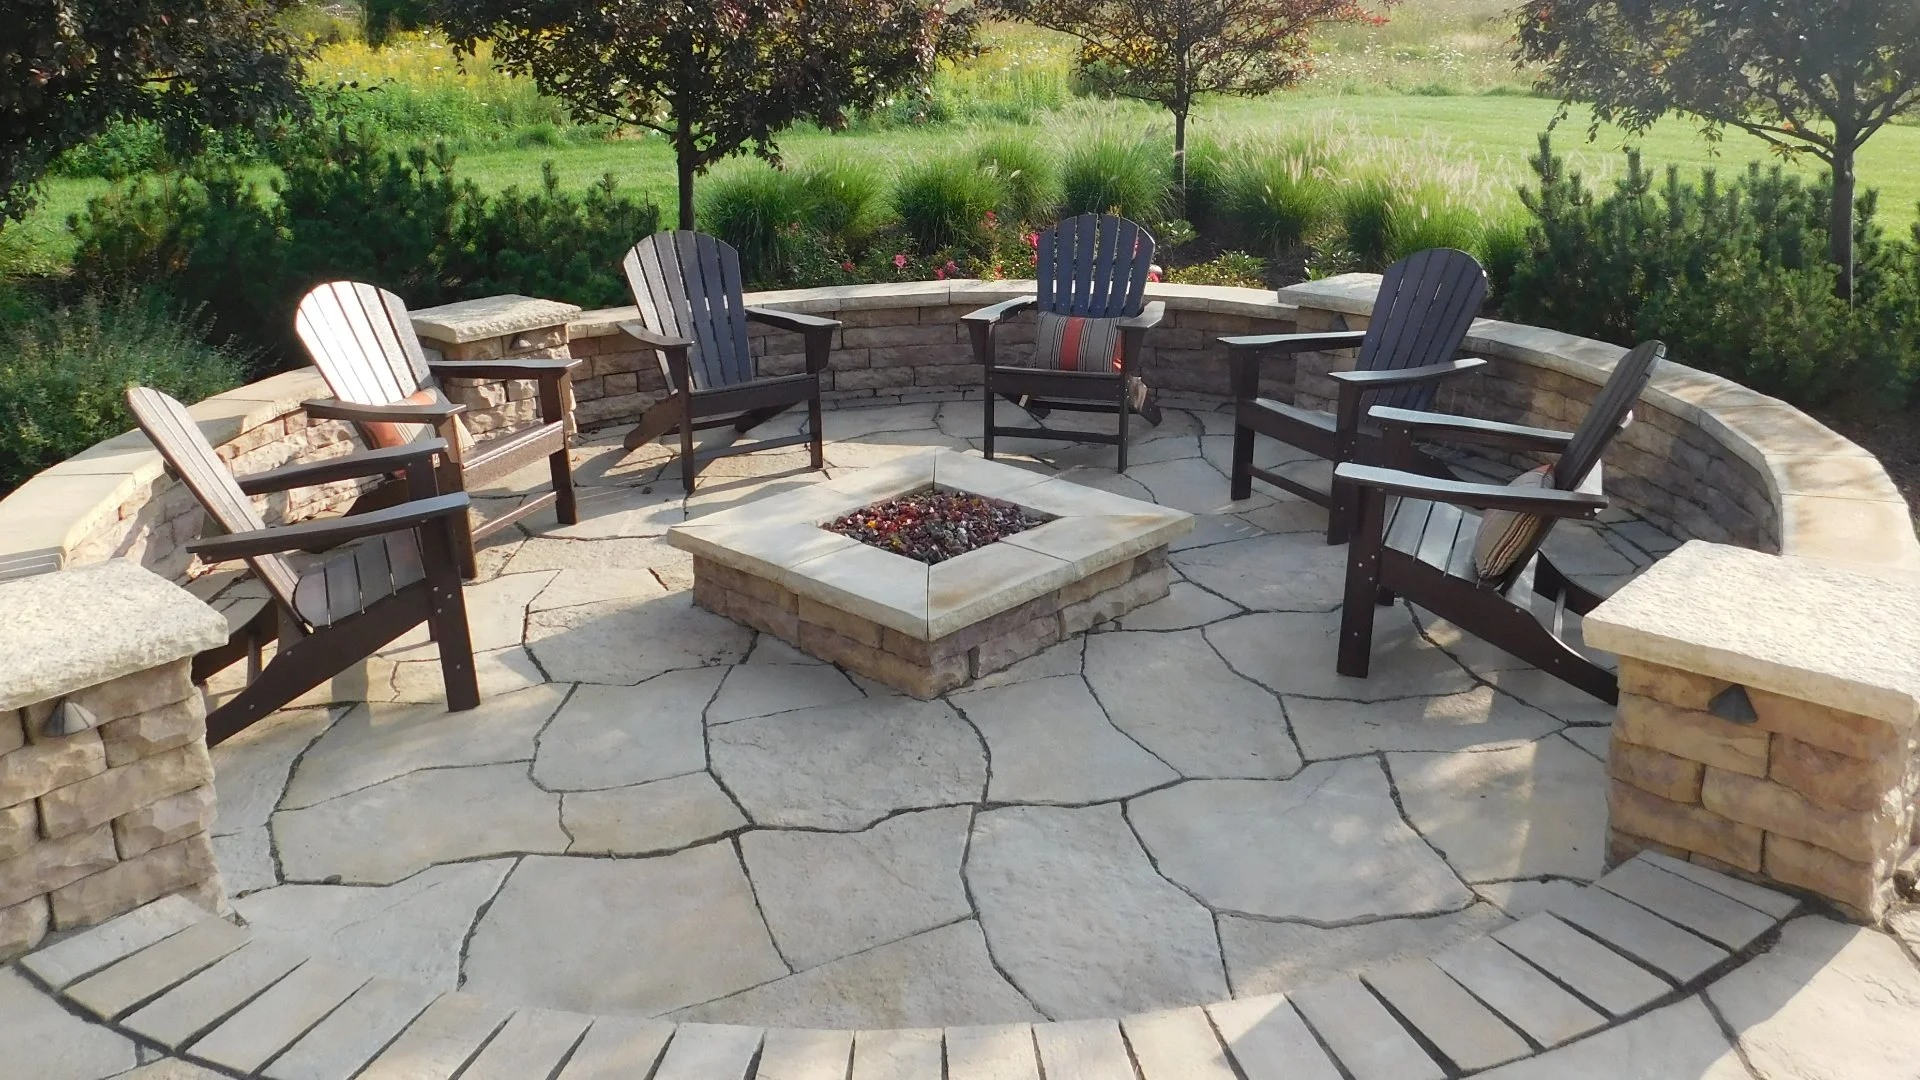 Designing a Fire Pit From Scratch? Here Are Some Things You Need to Consider